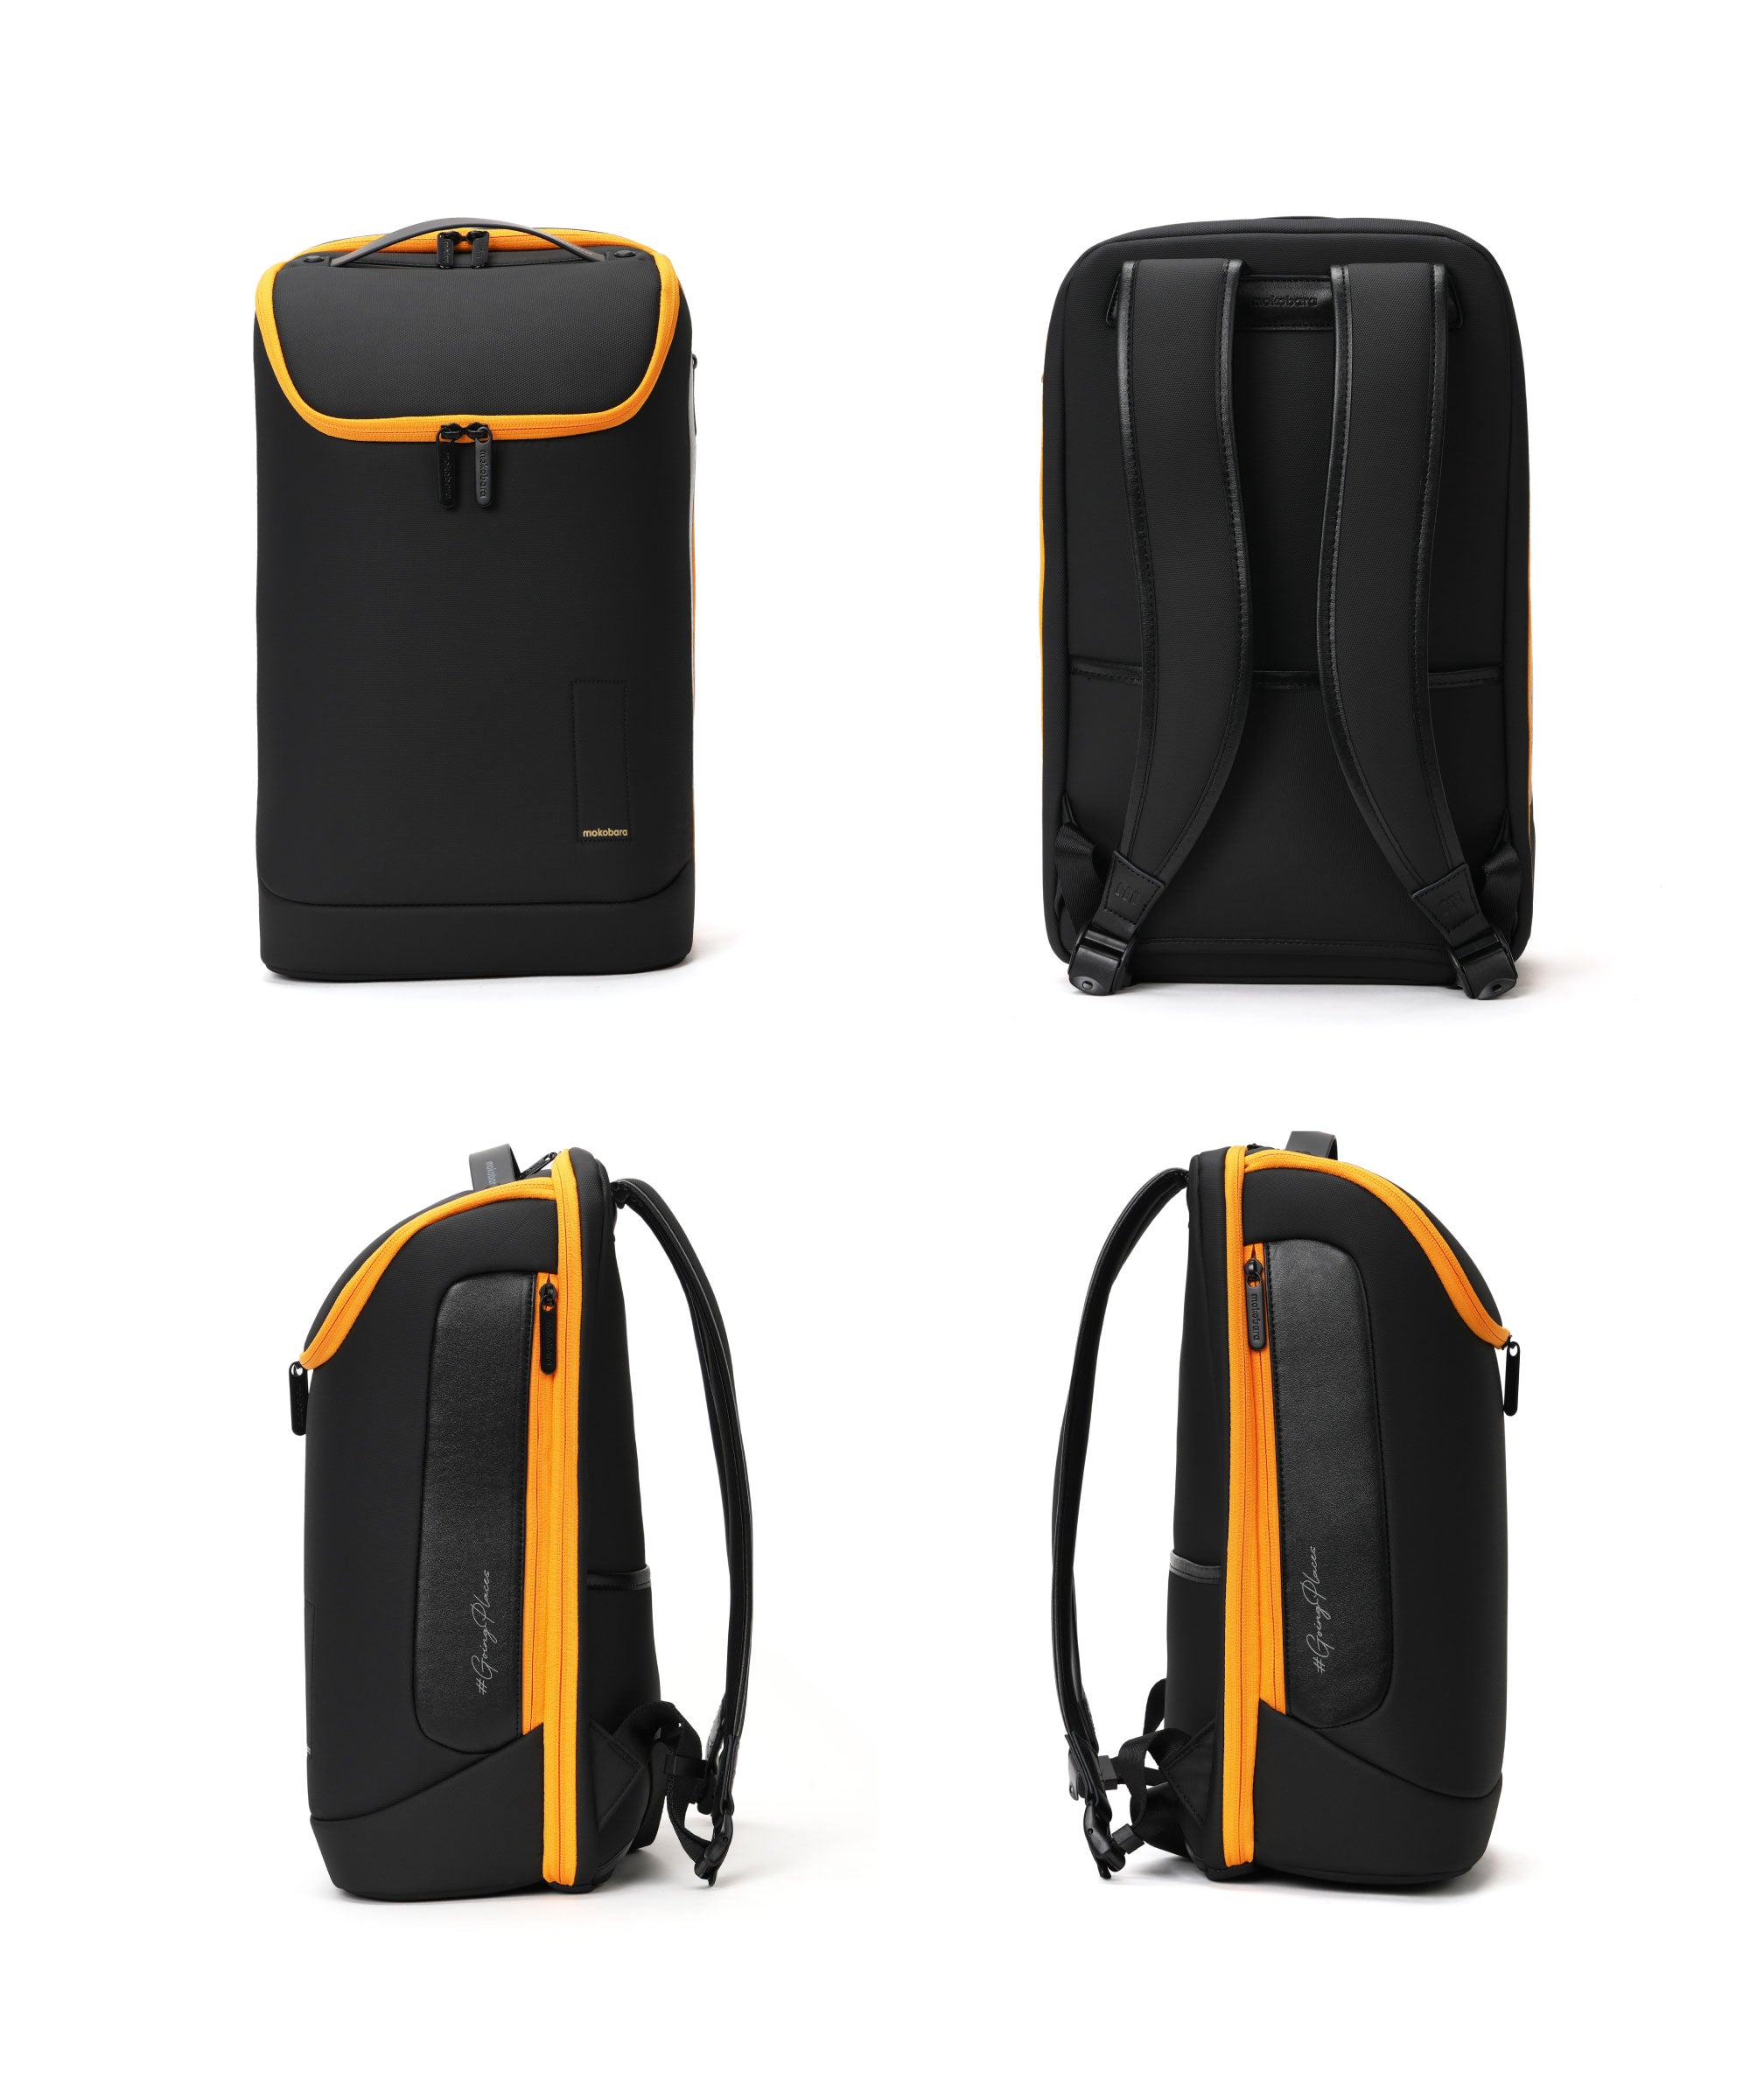 Color_Crypto Sunray | The Transit Backpack - 20L